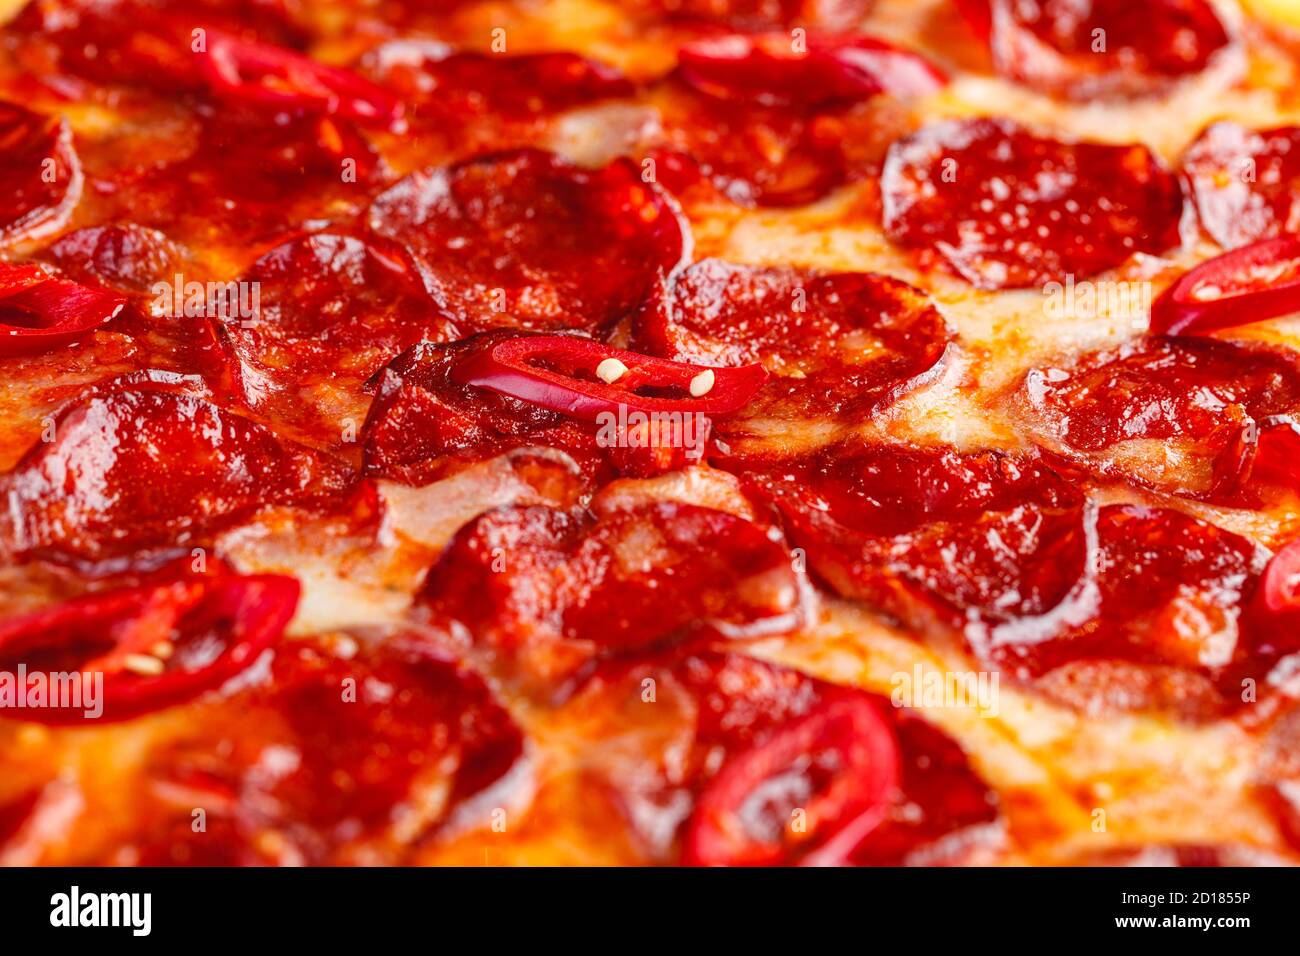 Pepperoni pizza on wooden board on a dark background. Close-up Stock Photo